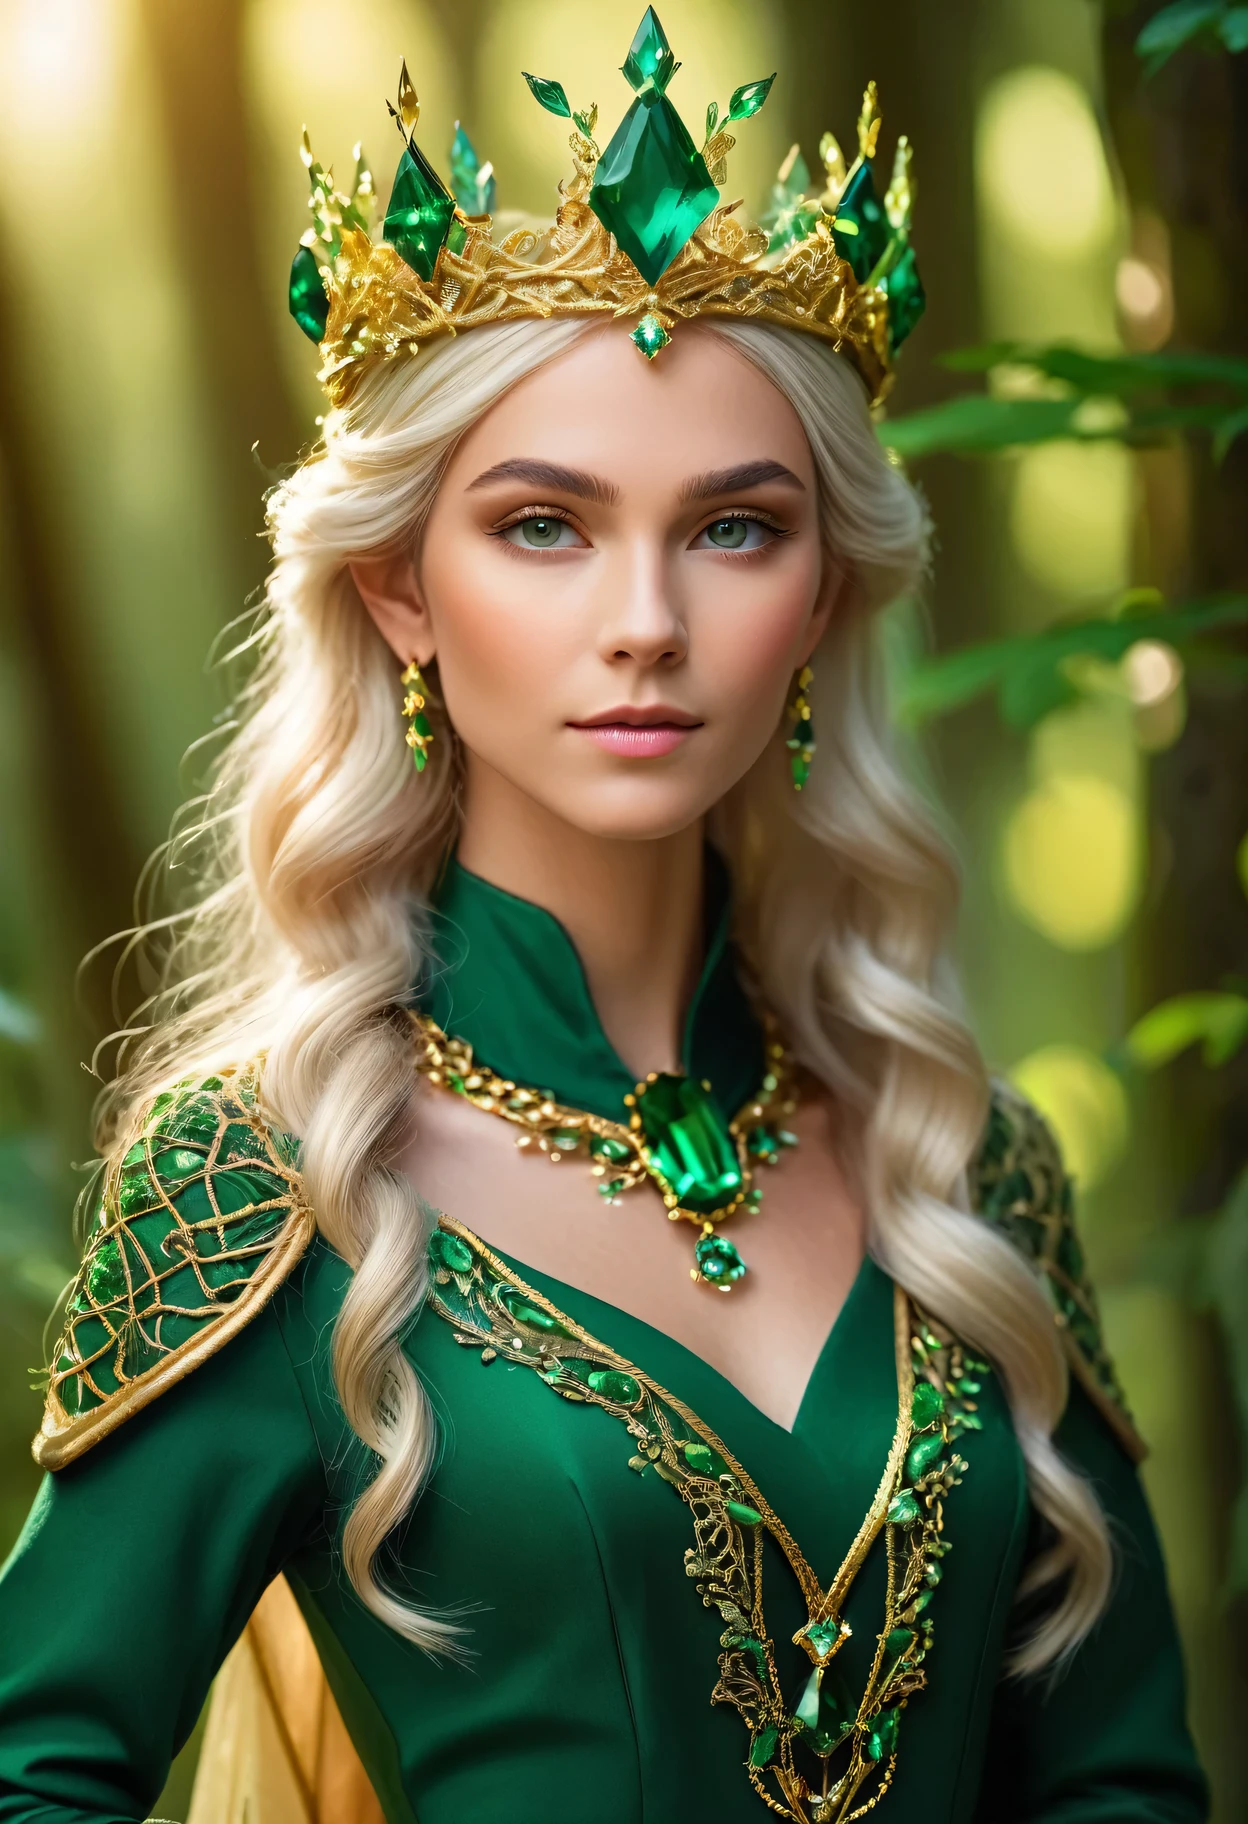 ProFessional photography For an elite magazine, the ElF Queen in chic Forest elF clothes with intricate green painting, on her head an elegant crown made oF an intricate weave oF golden threads, the ElF Queen poses, in her hand a crystal crystal glowing green From inside, the ElF Queen looks at the viewer, Full pose, Full body, worthy pose oF a queen, clins d&#39;œil, Appareil photo Canon EOS R5 avec objectif Canon RF 100-500 mm F4.5-7.1L EST USM, 500 millimètres, 1/500 s., F/7.1 et ISO 1000.